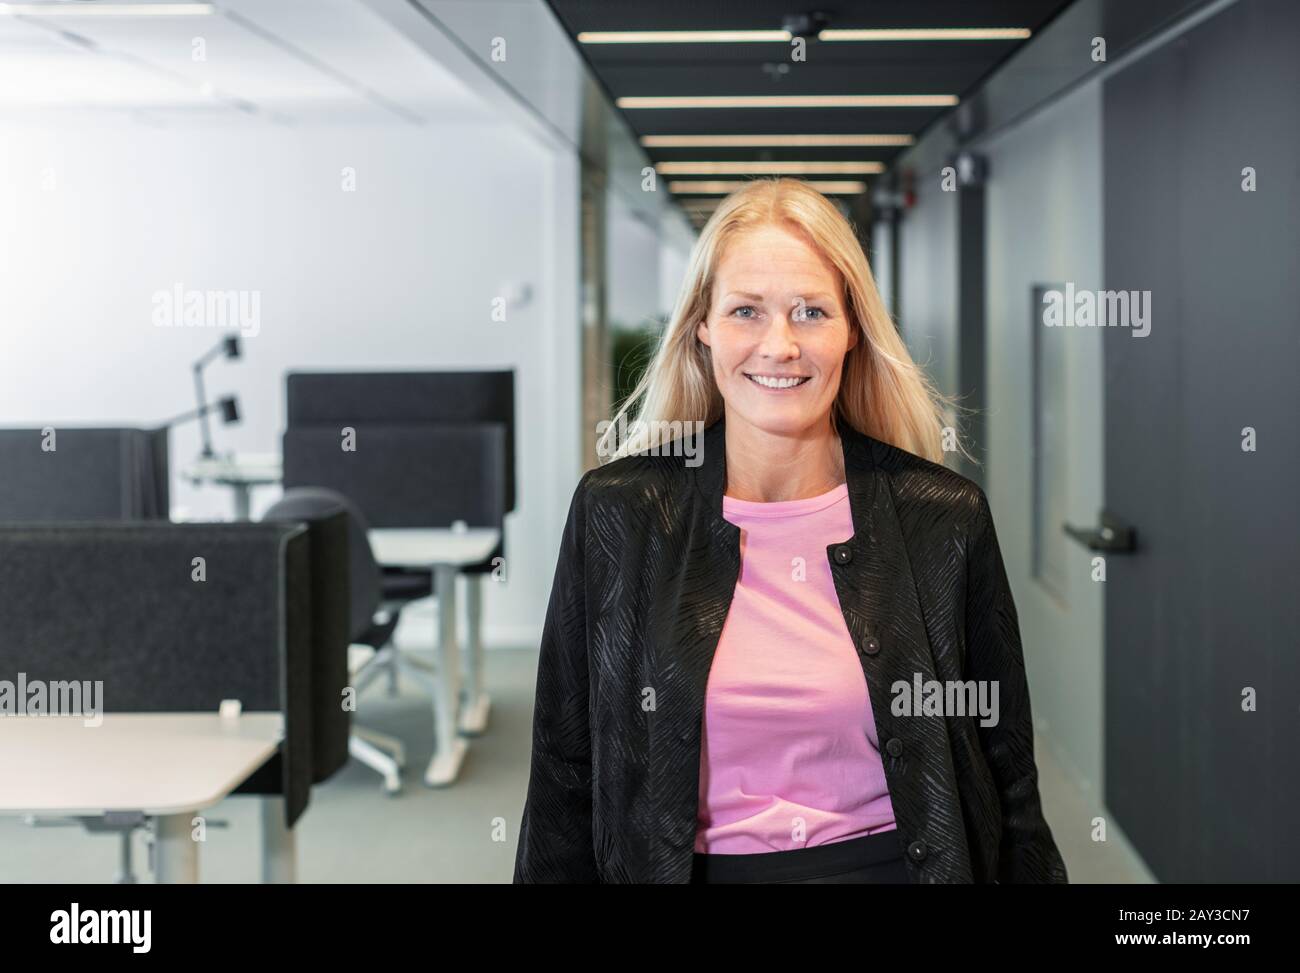 Woman in office Stock Photo